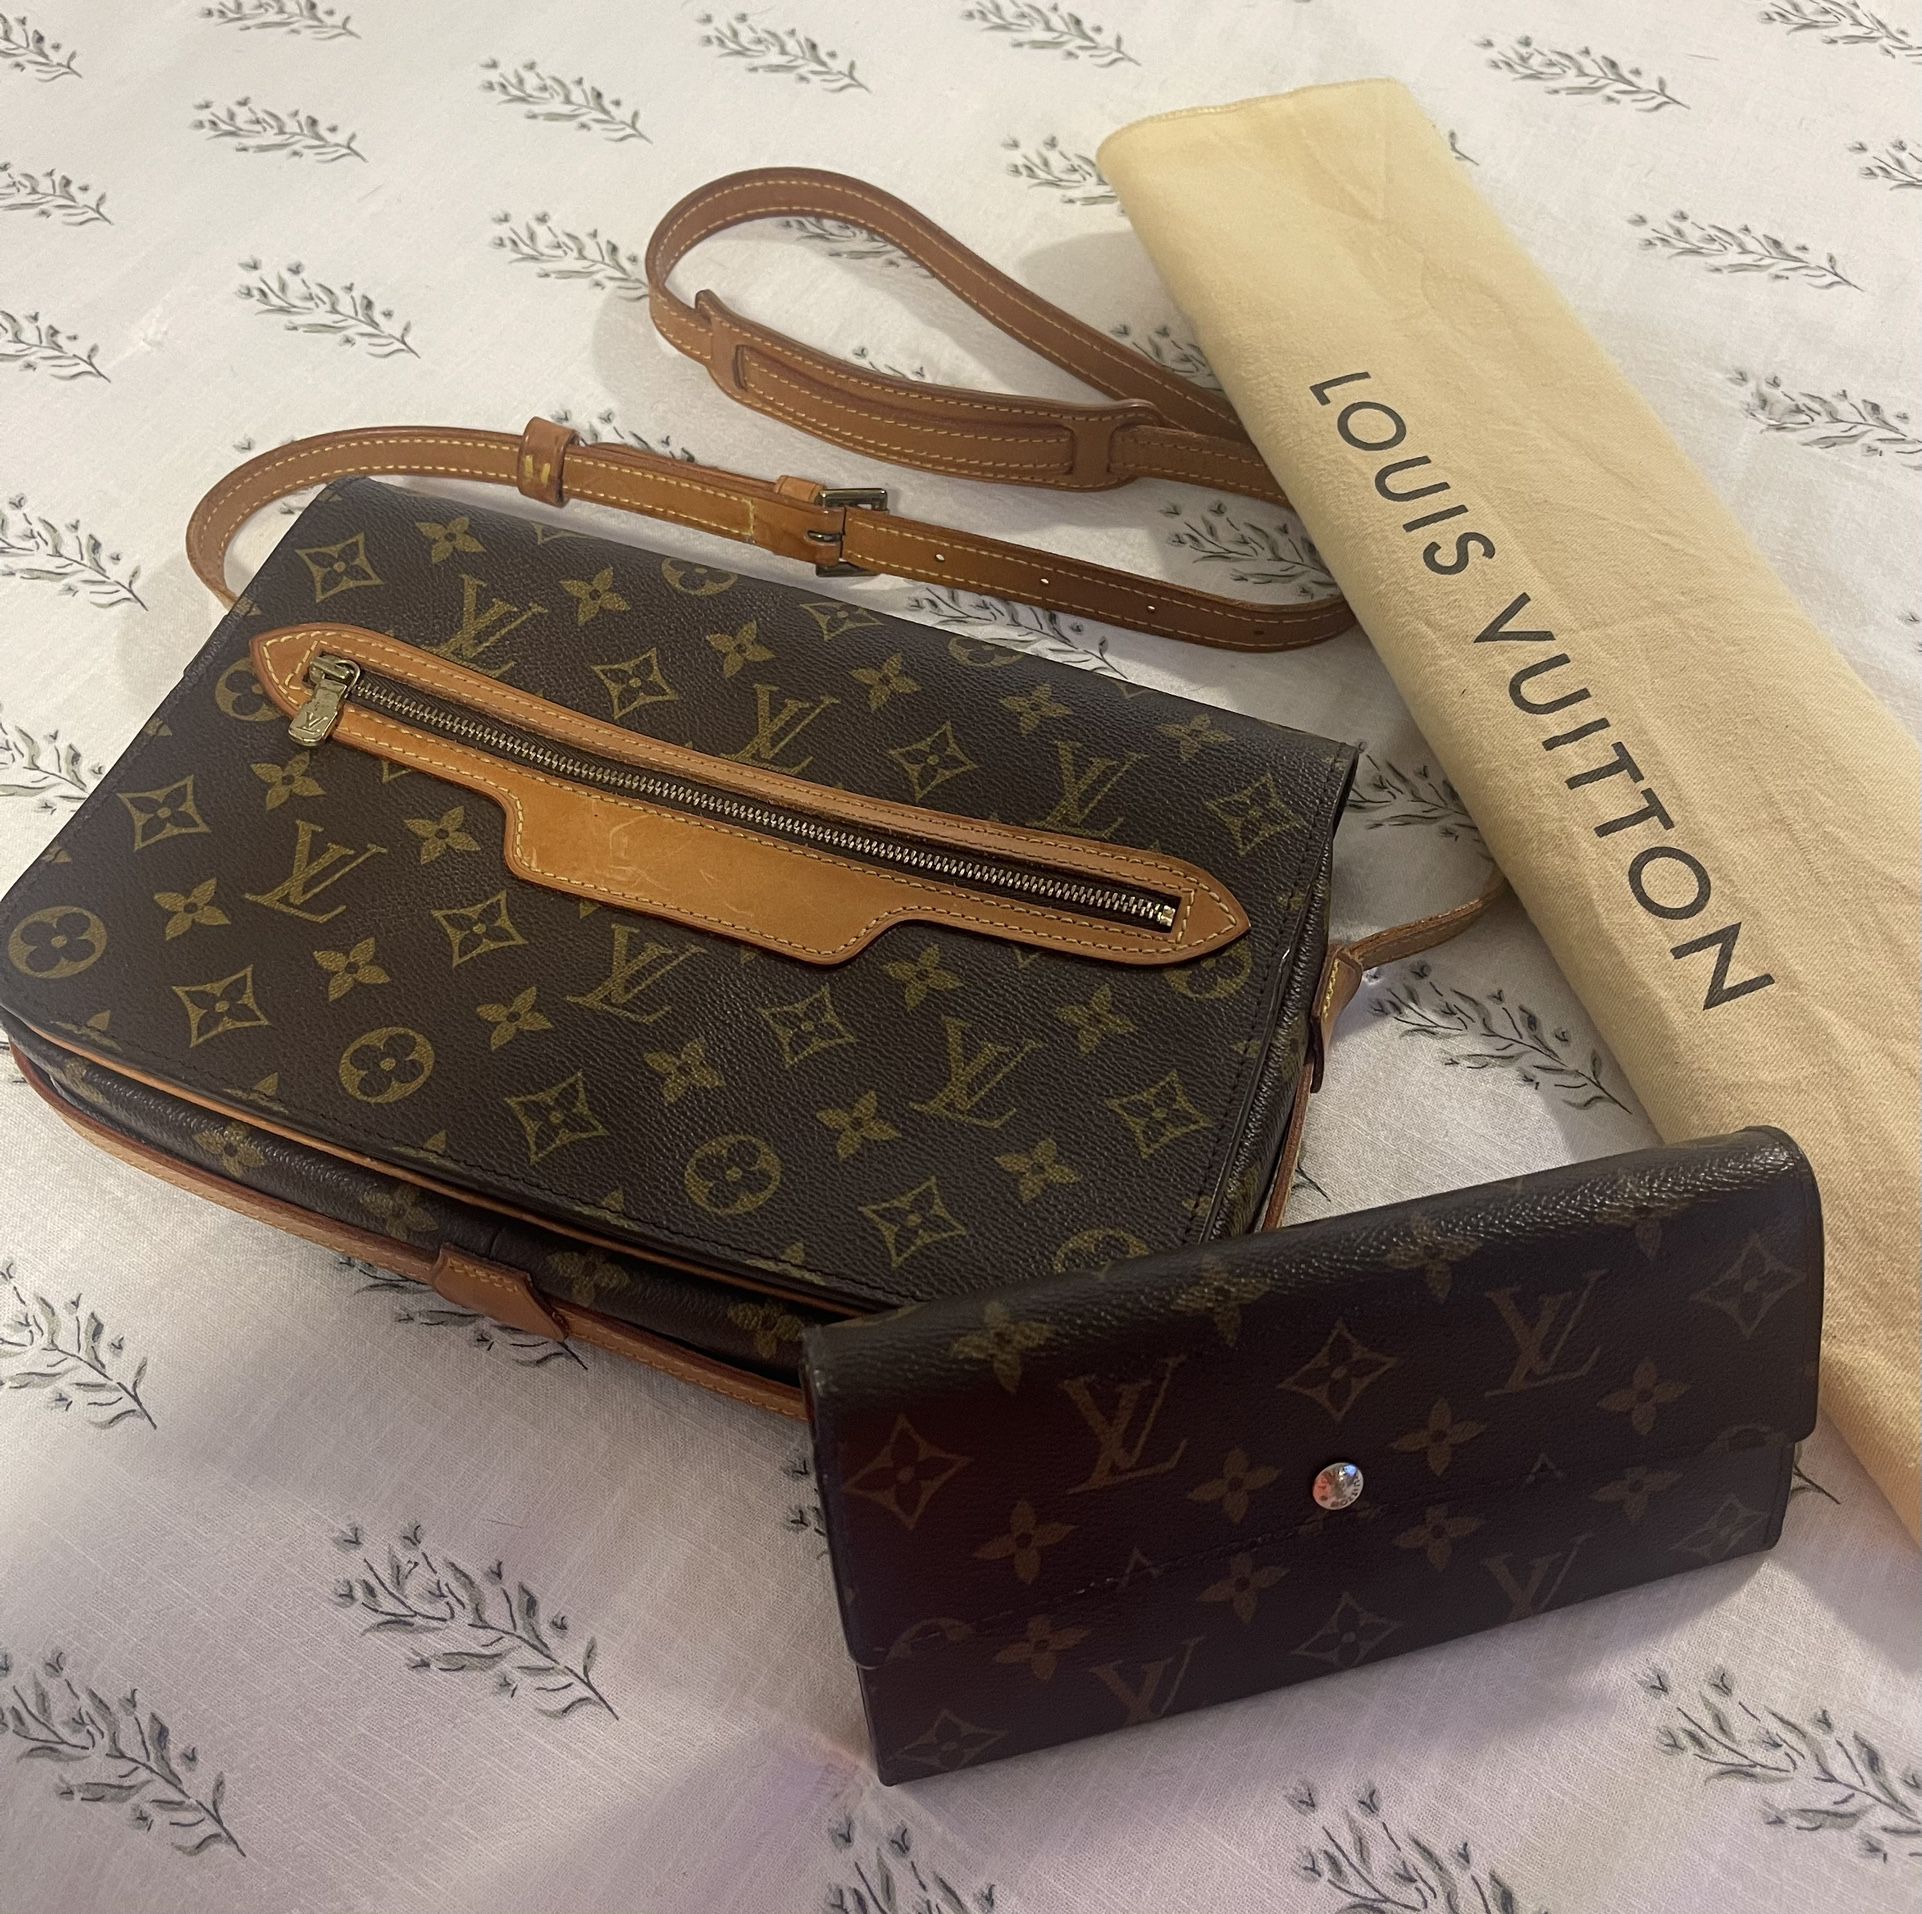 Authentic Louis Vuitton Crossbody Bag & Wallet for Sale in